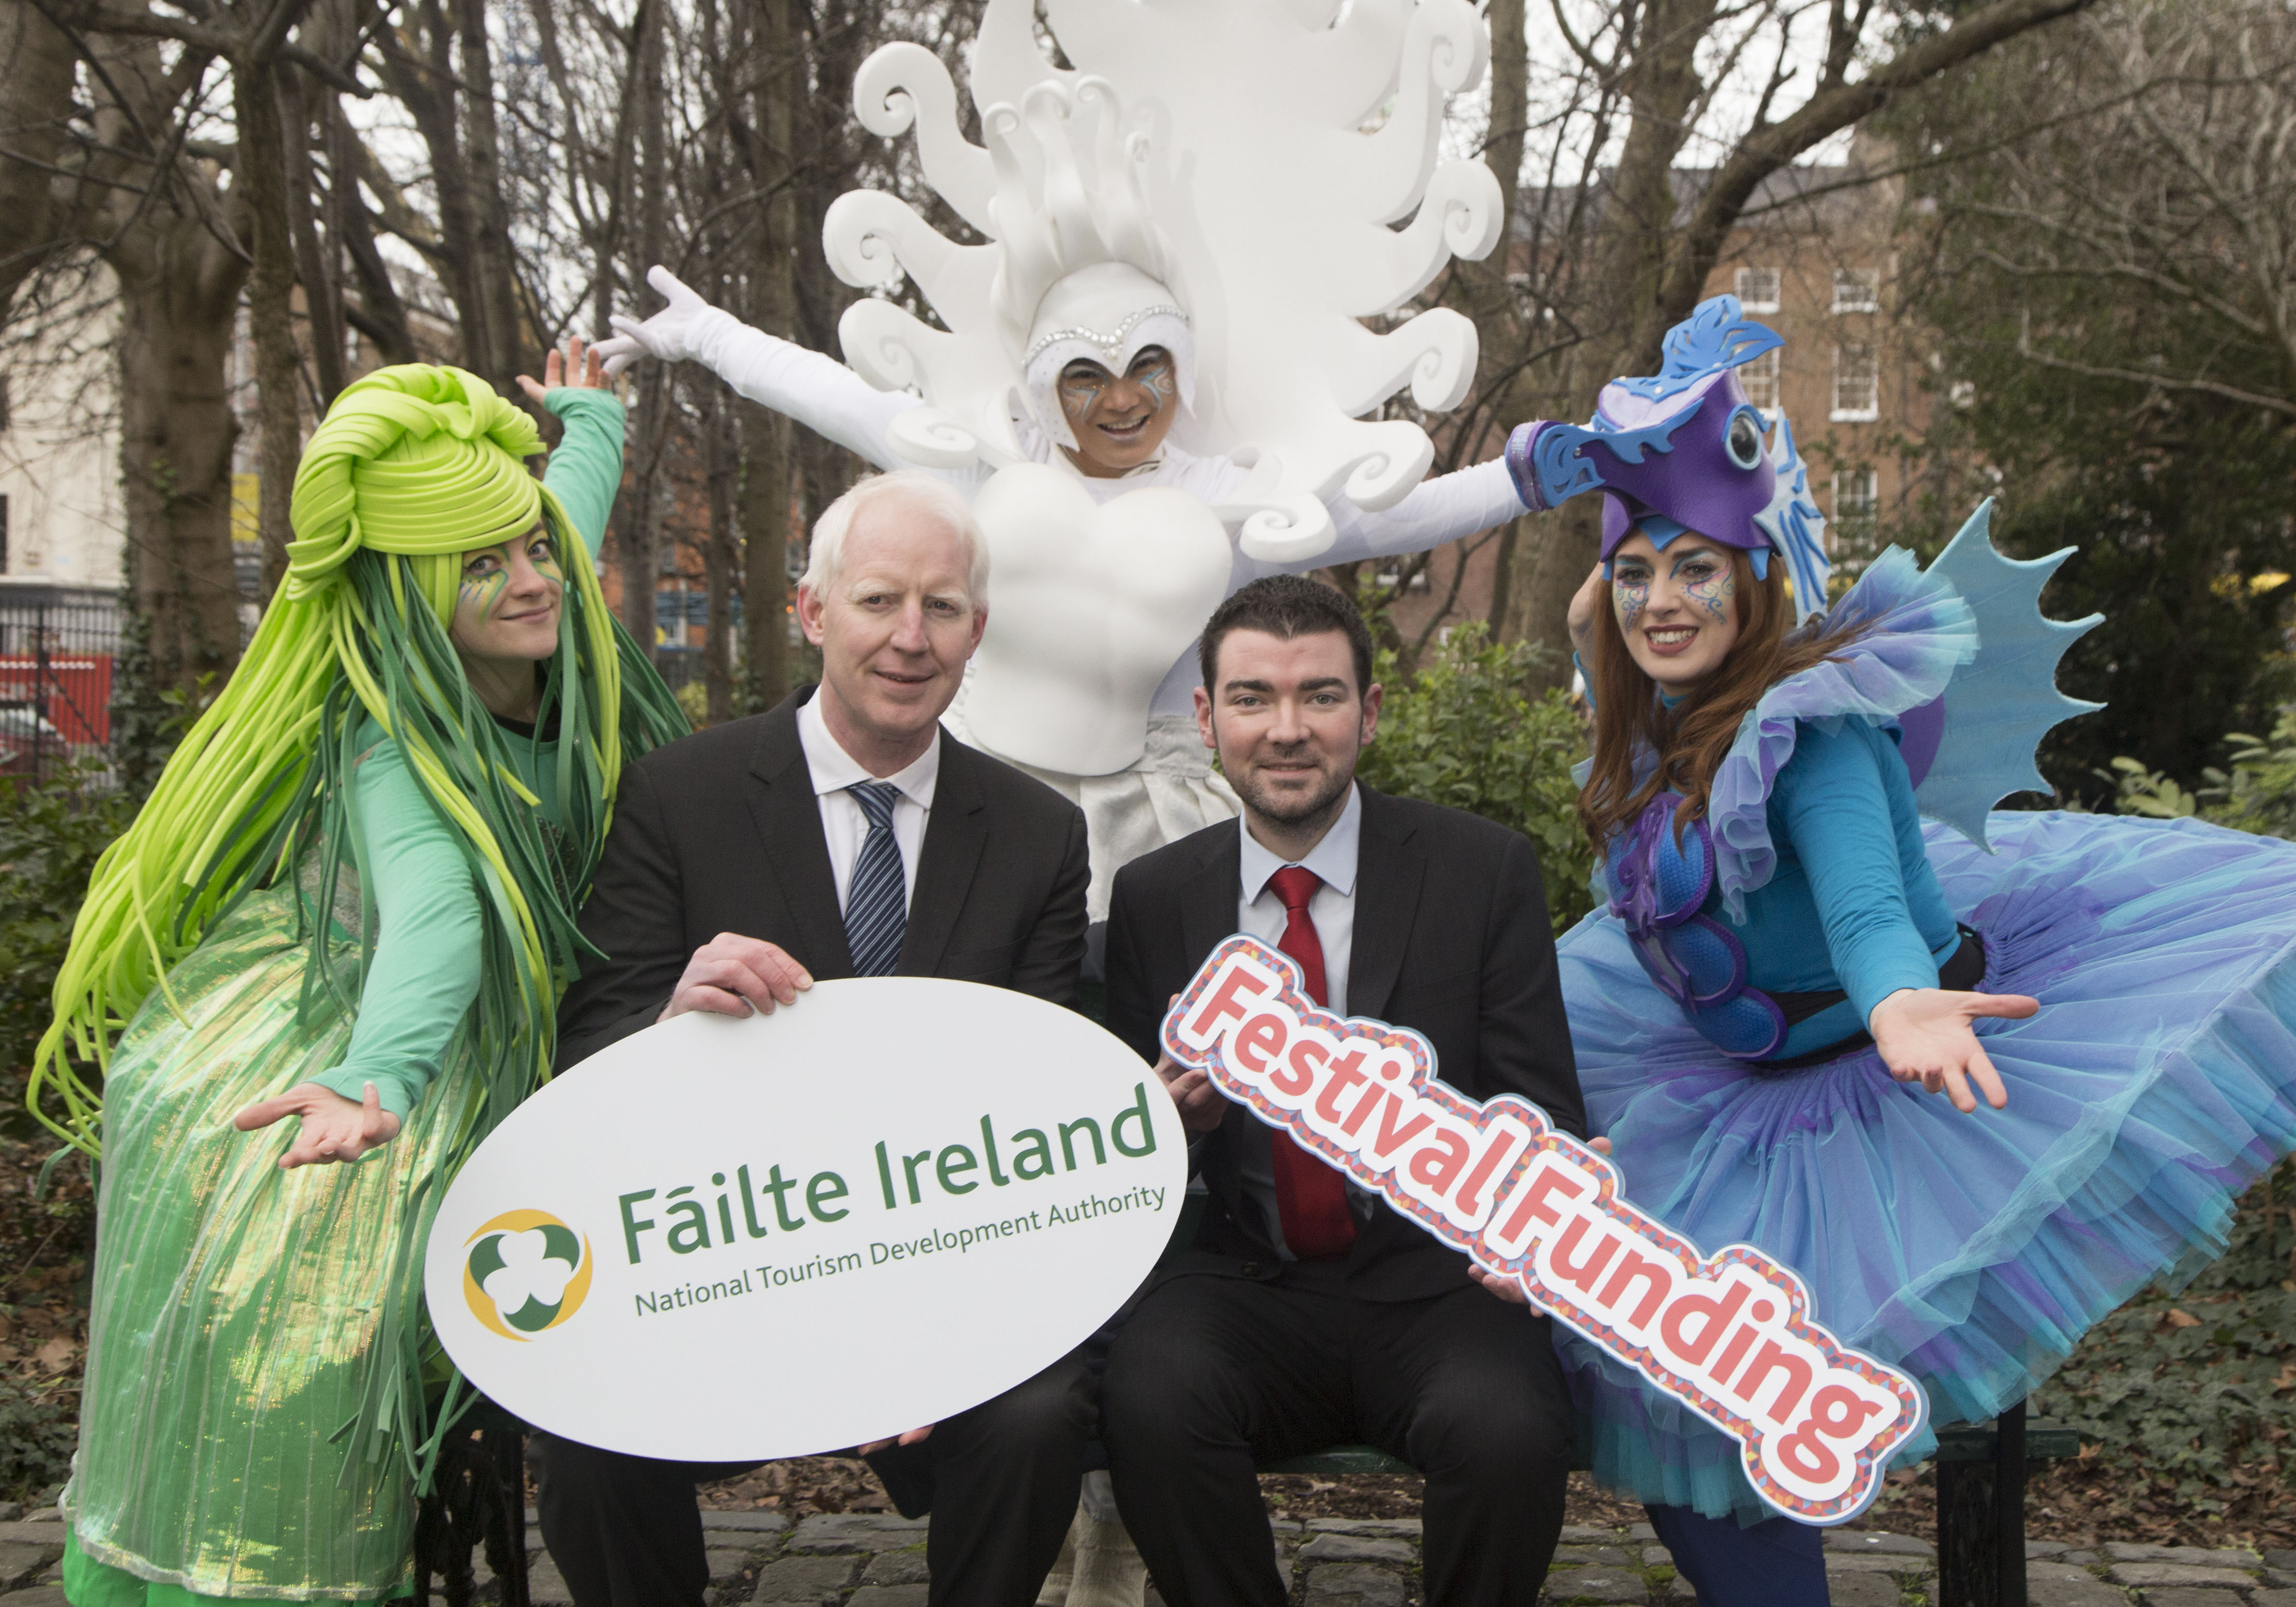 Fáilte Ireland announces funding of €3 Million for Major Festivals and Events